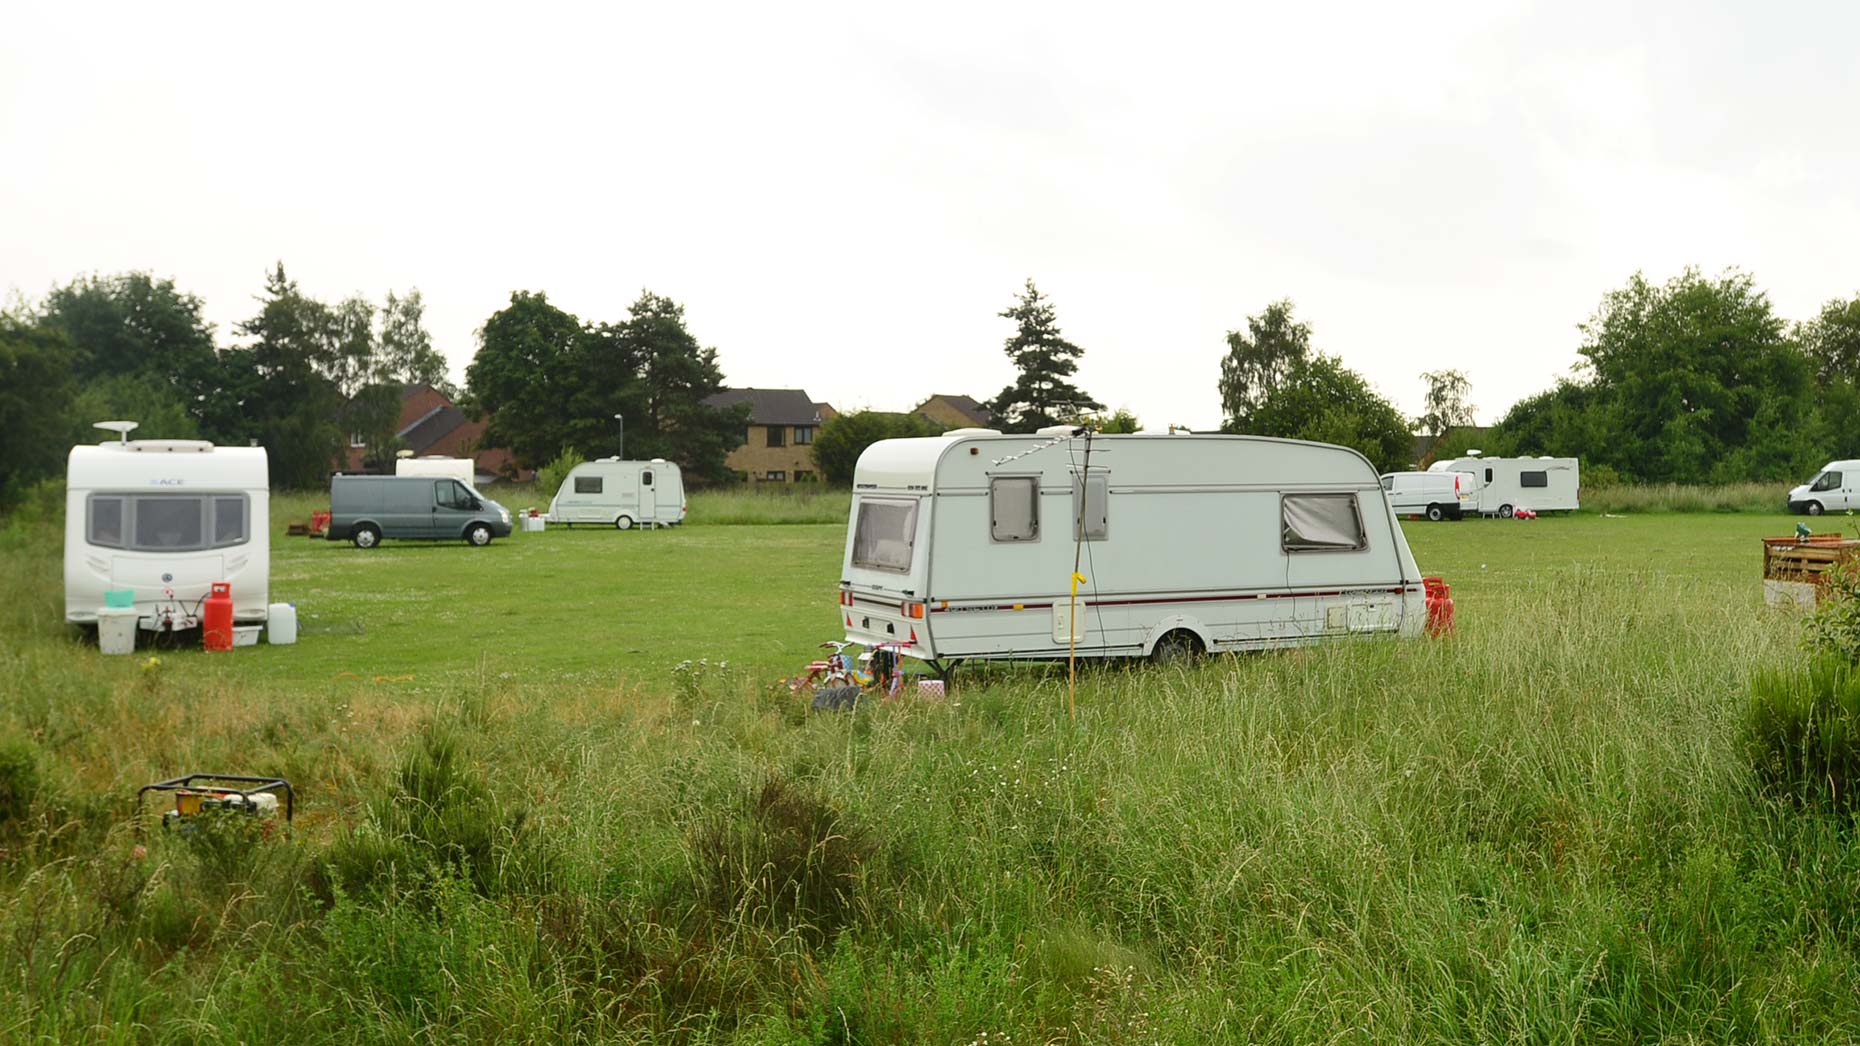 The caravan camp in Birchwood. Photo: Steve Smailes for The Lincolnite